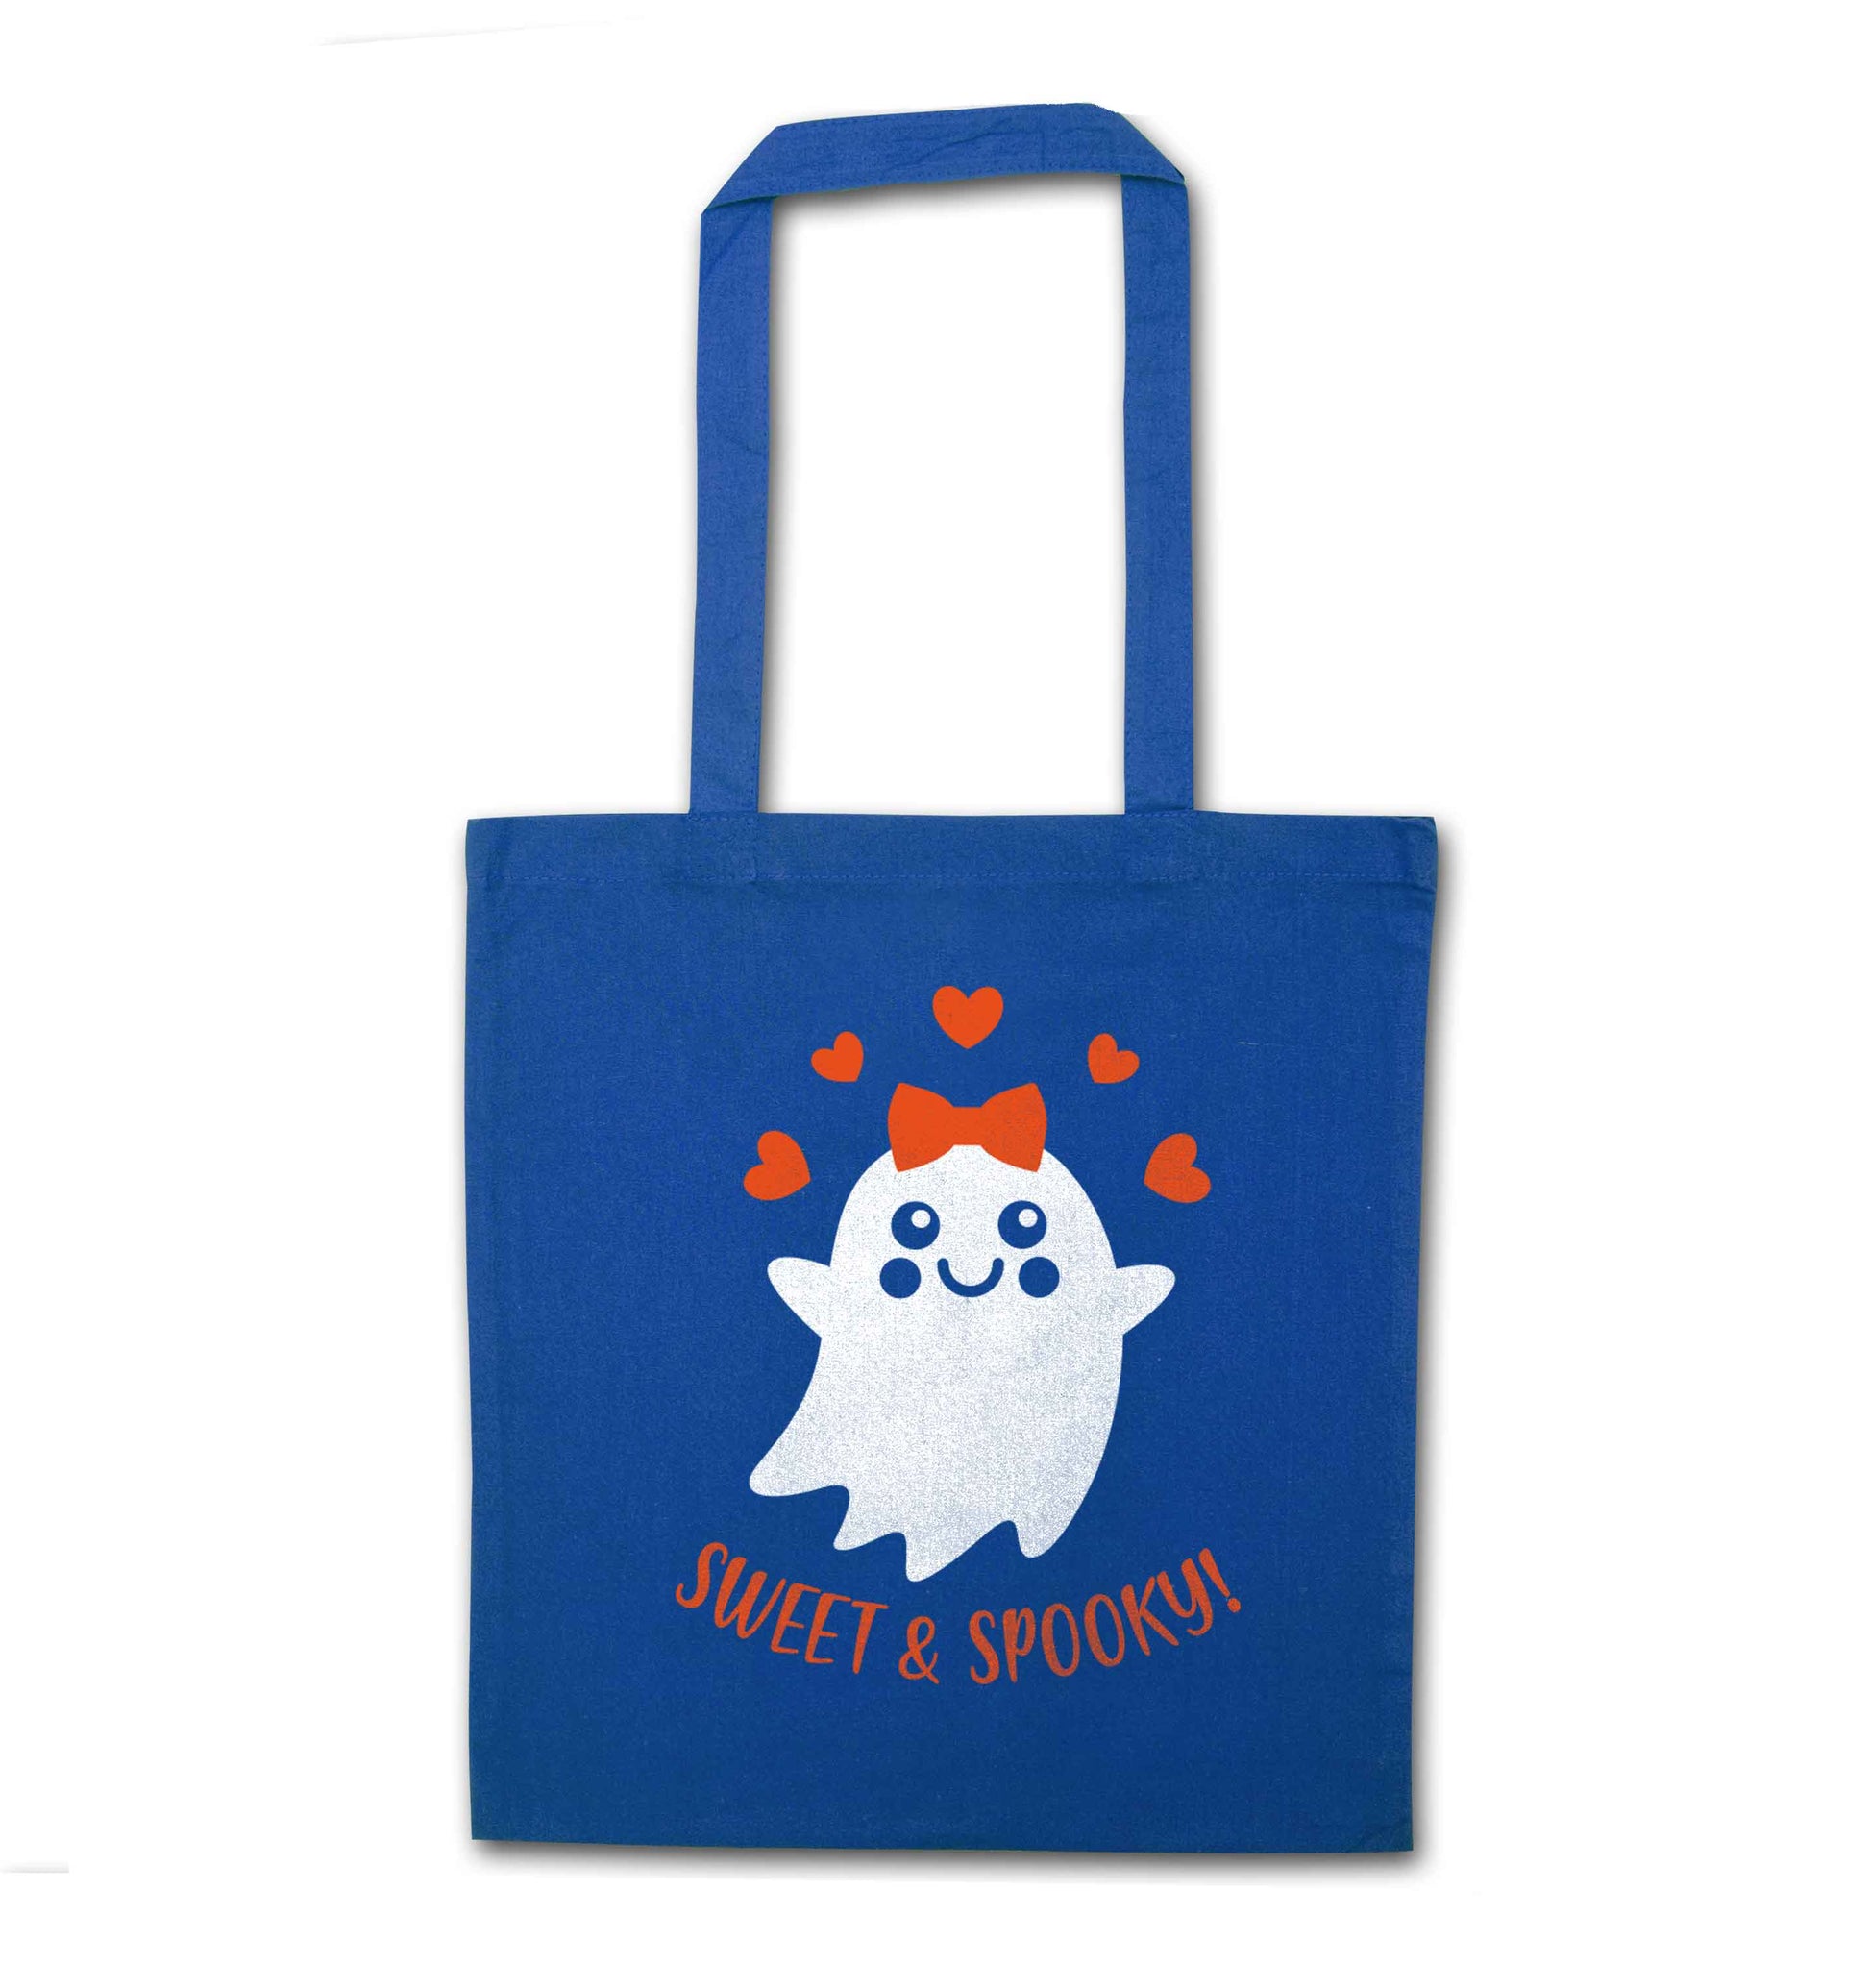 Sweet and spooky blue tote bag